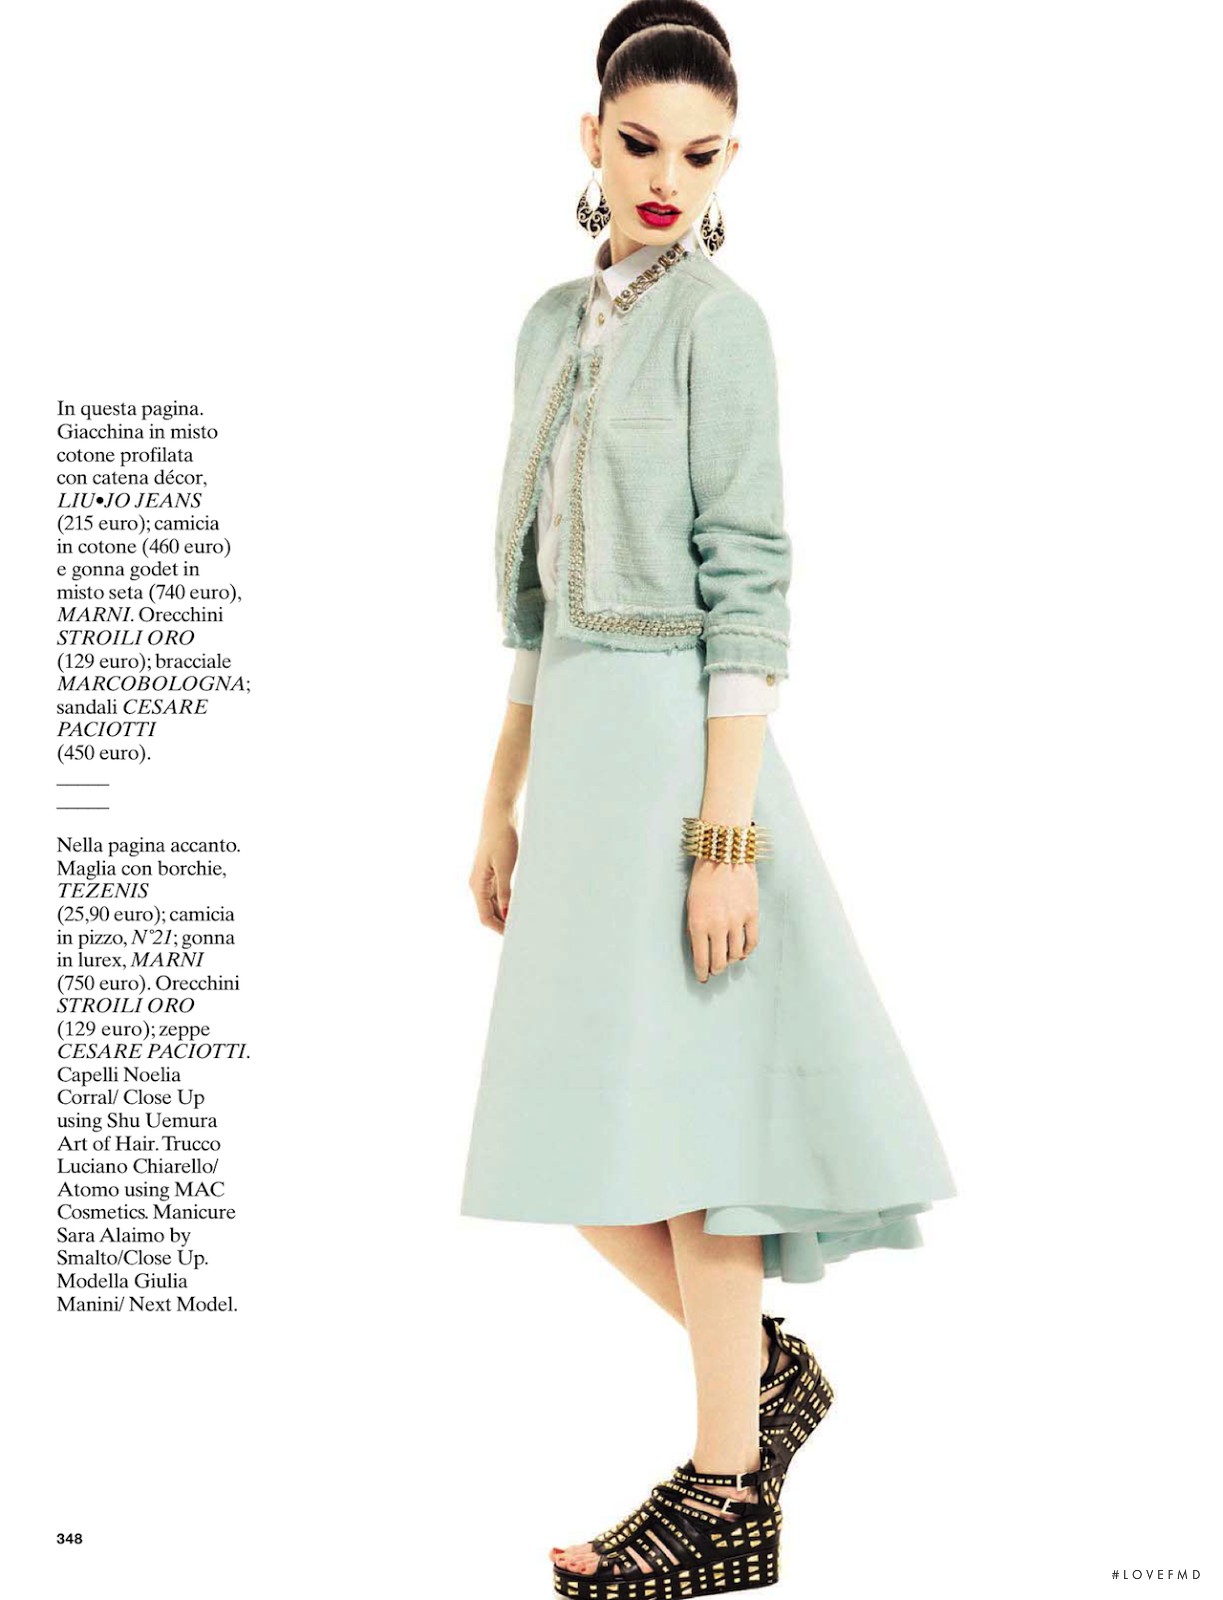 Audrey Rock in Glamour Italy with Giulia Manini wearing Marni,Cesare ...